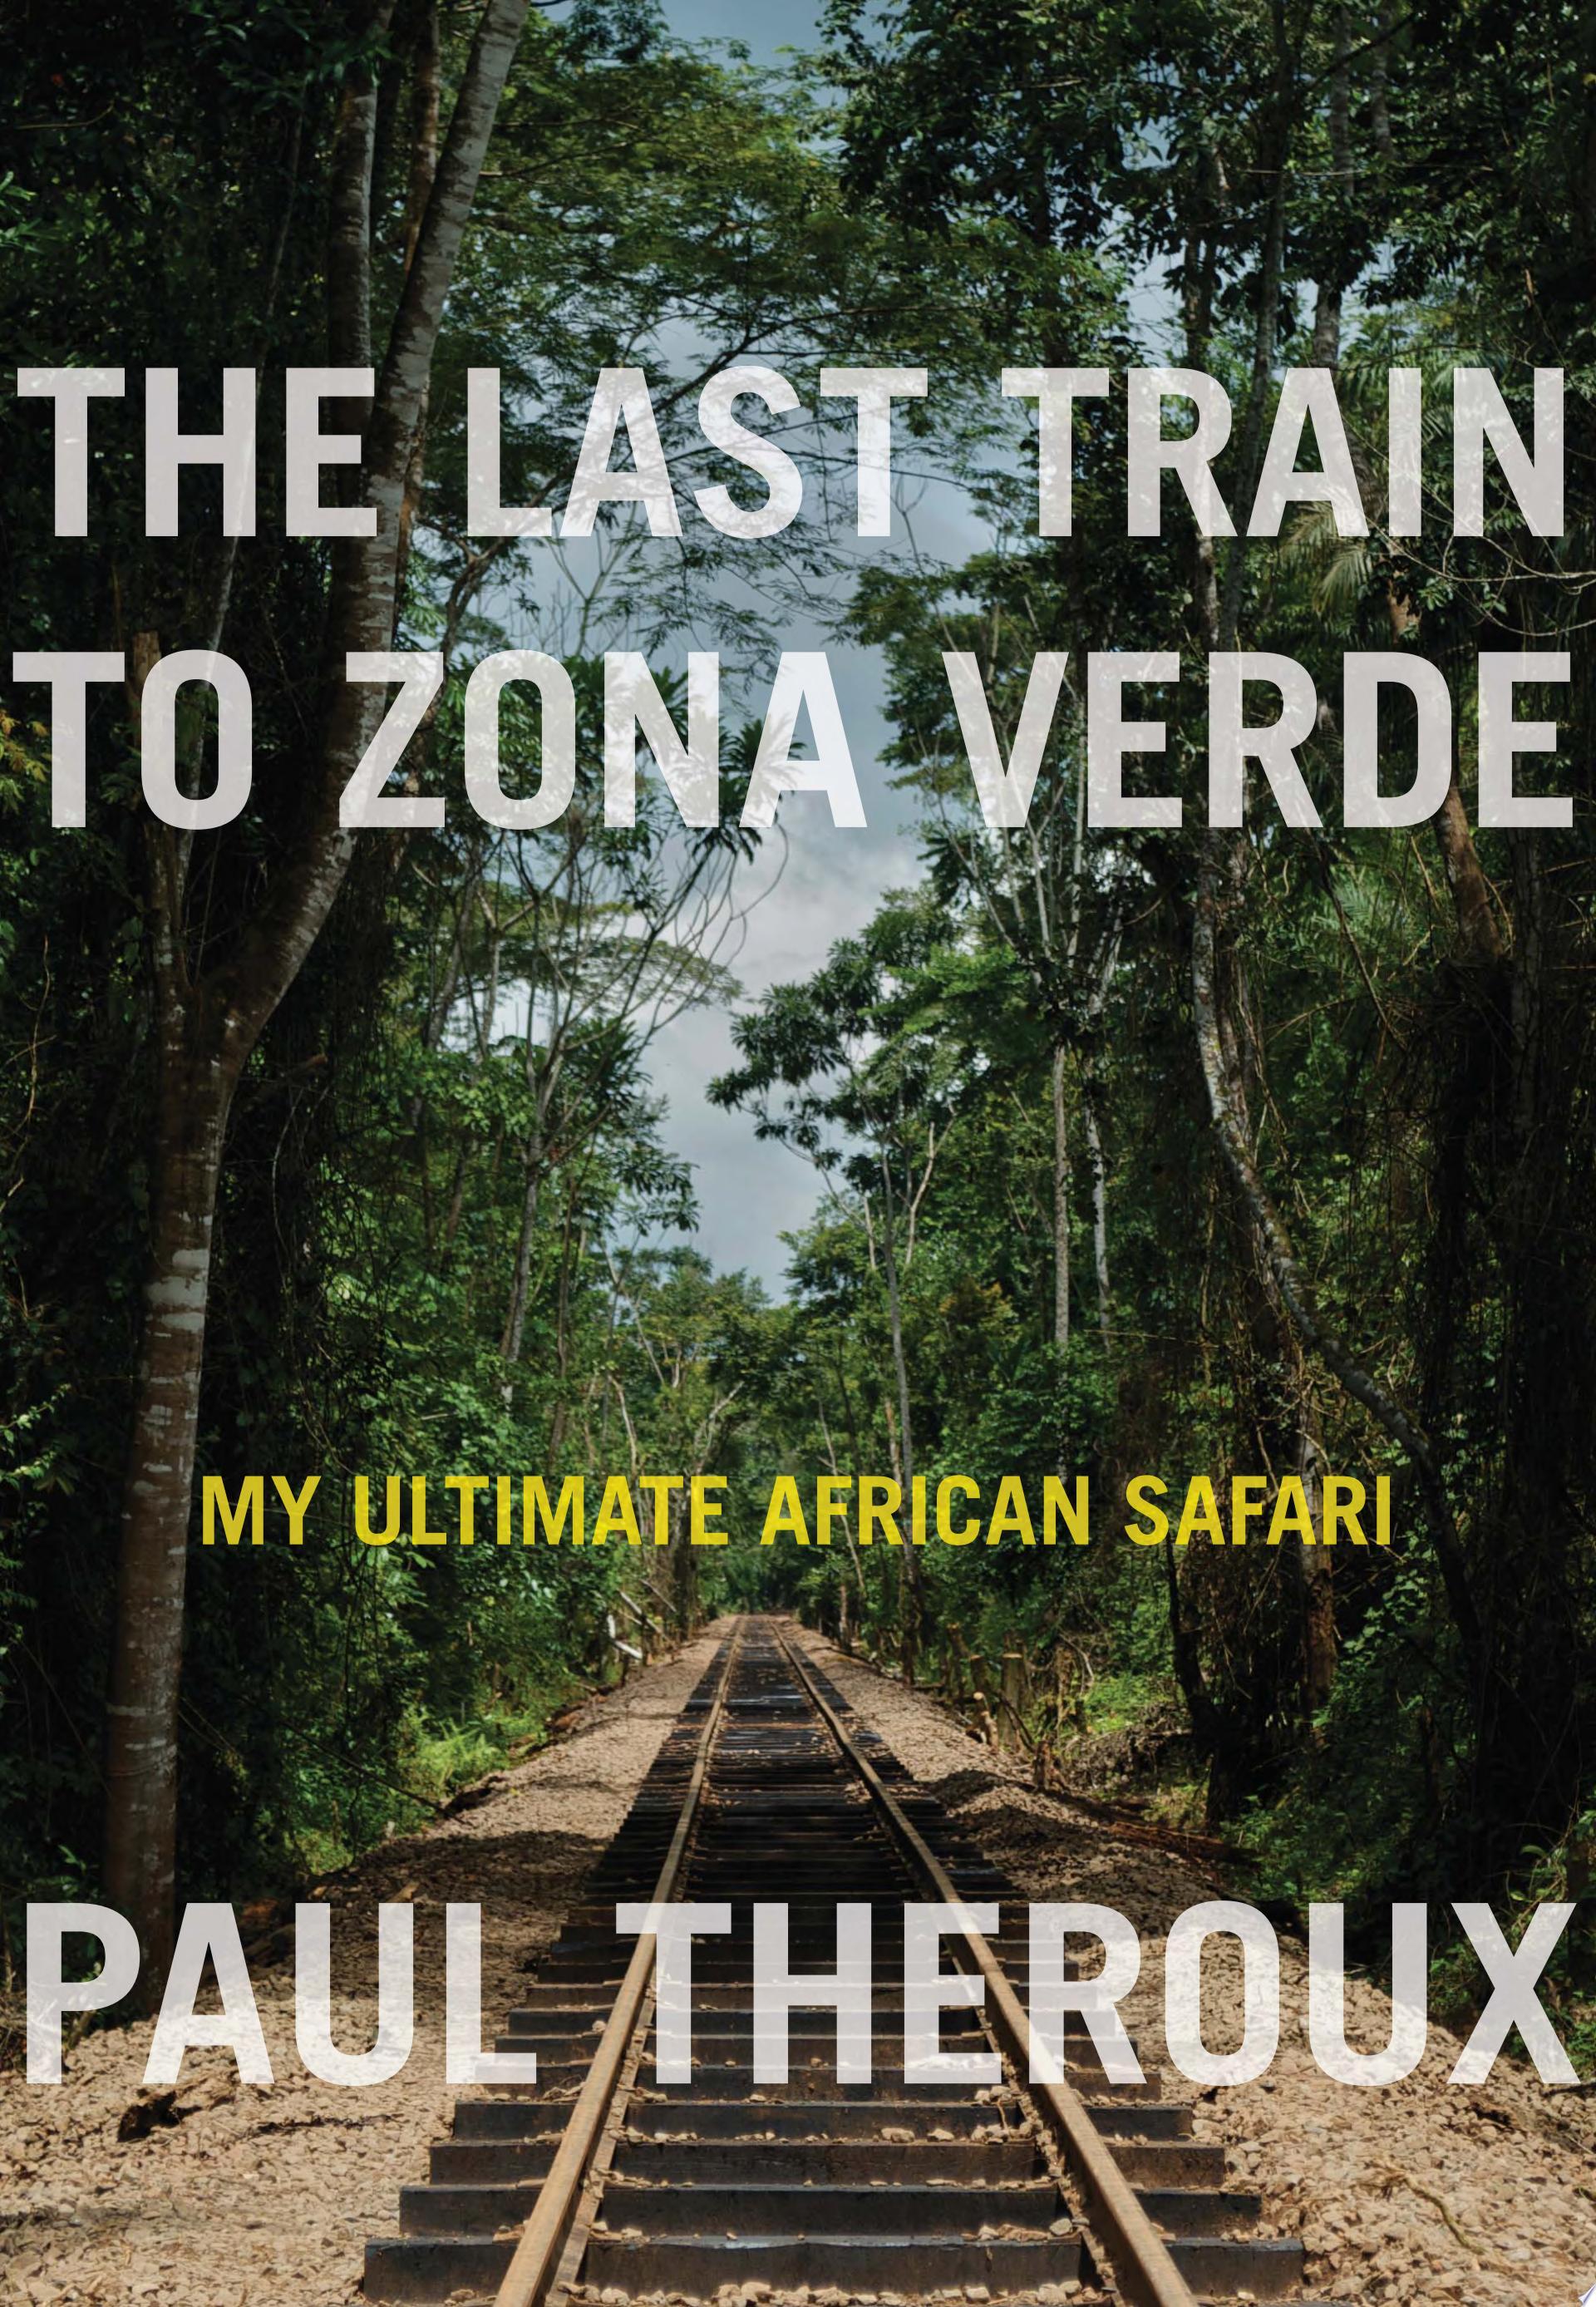 Image for "The Last Train to Zona Verde"